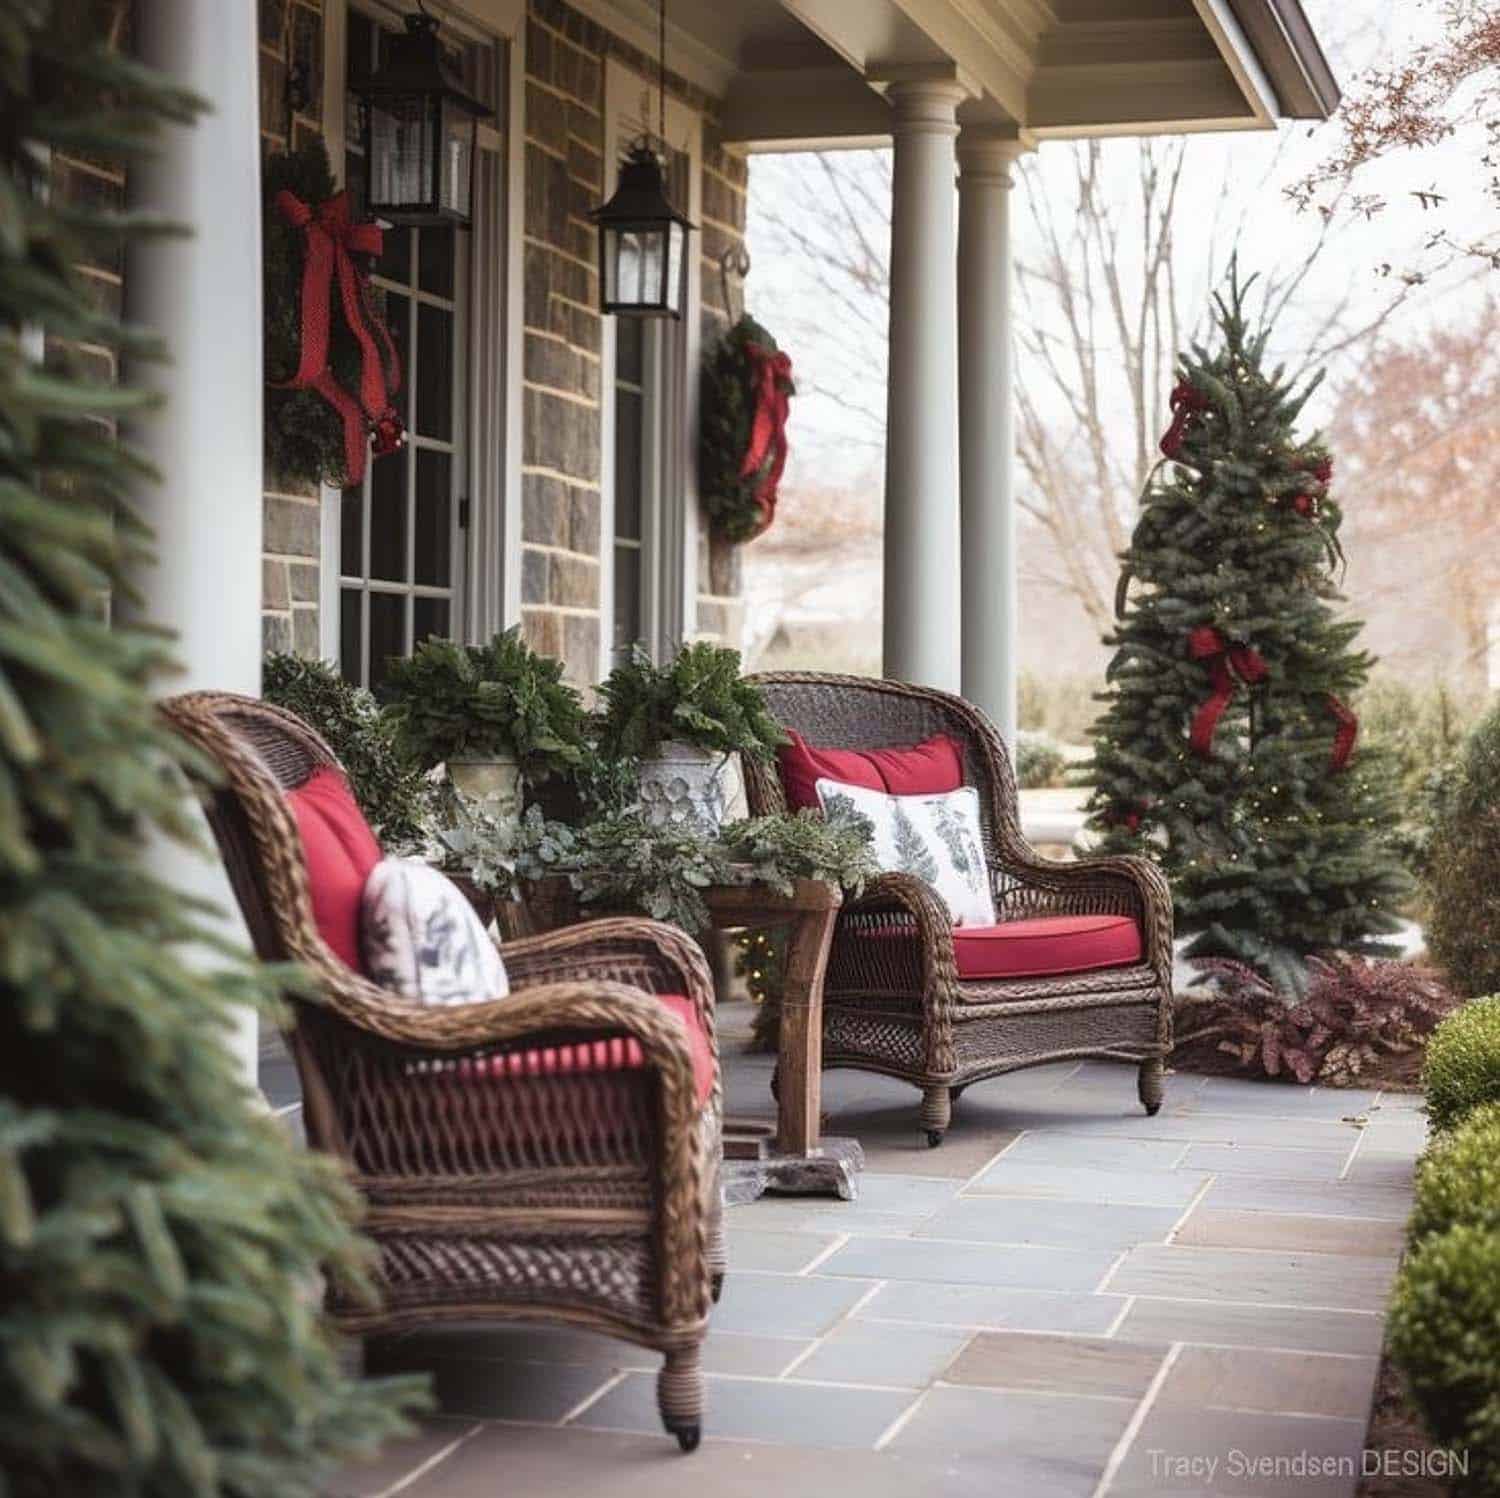 Christmas red and green theme on the front porch